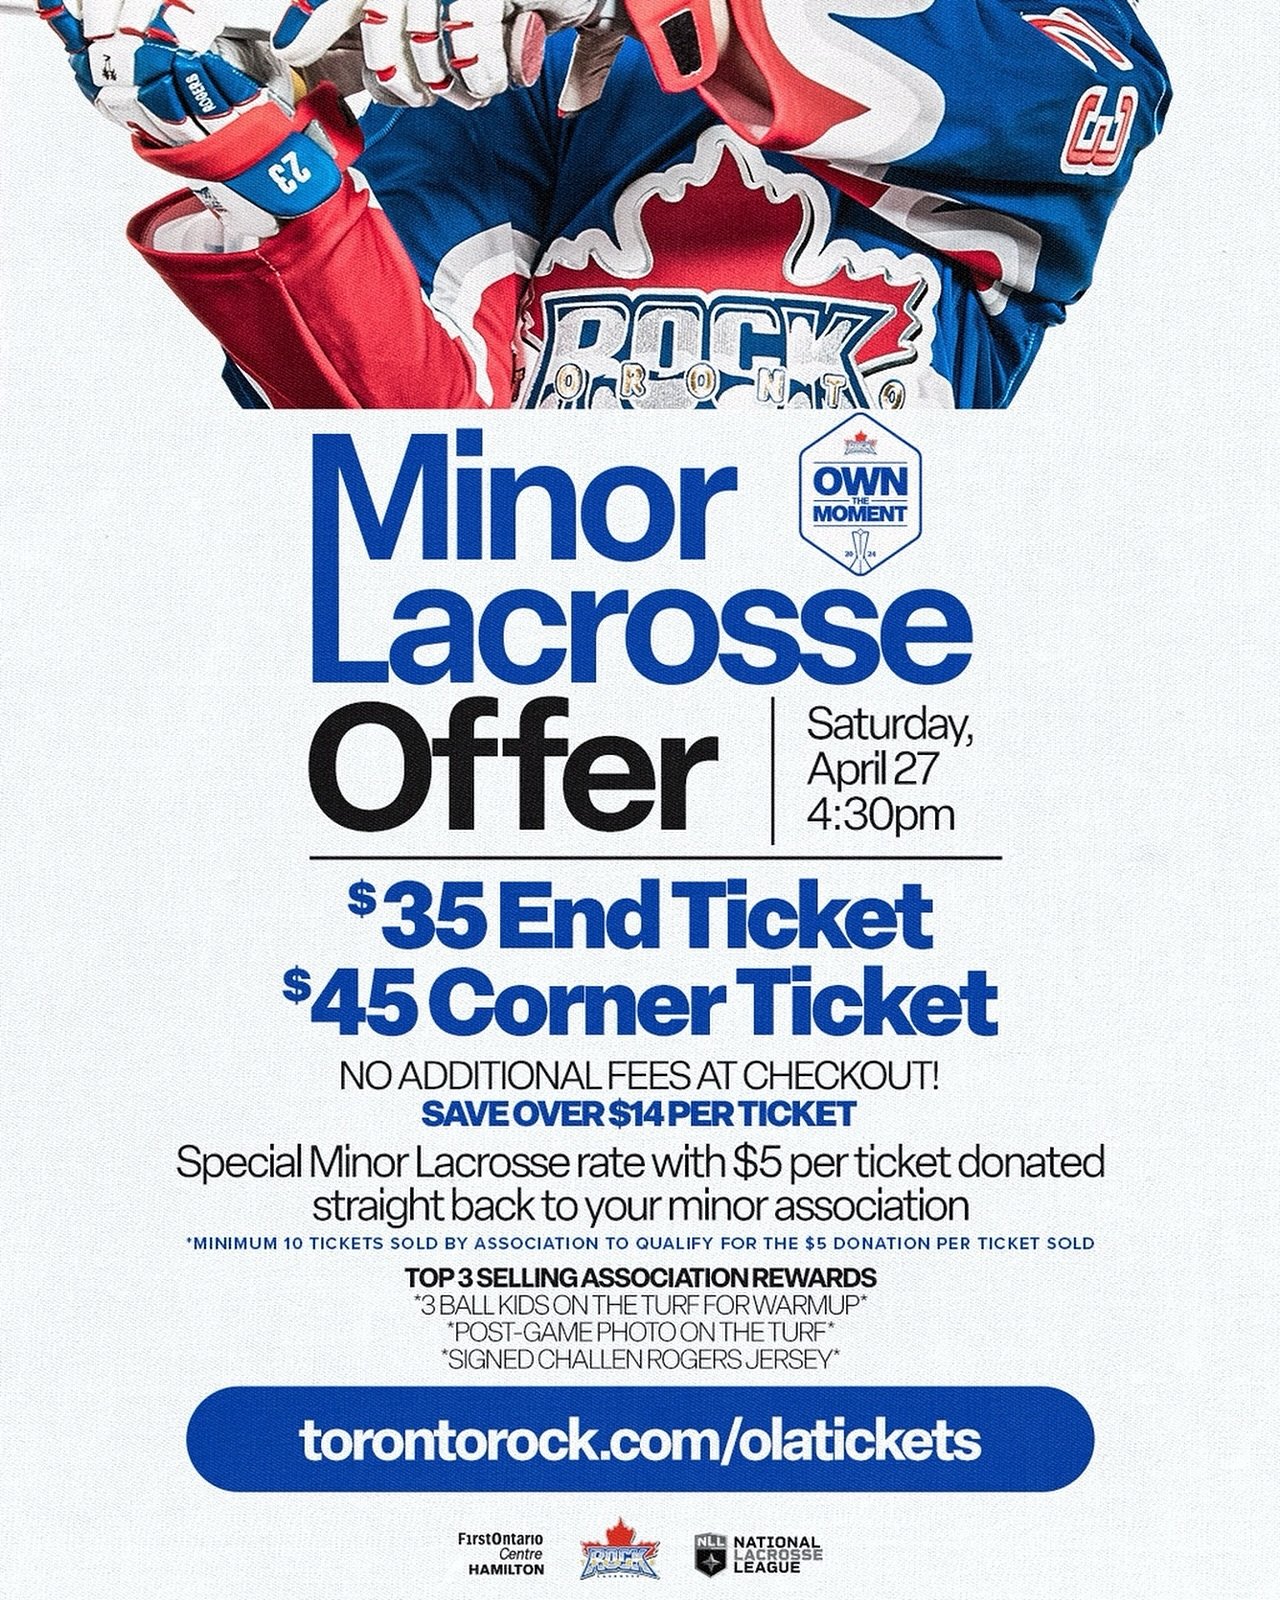 FUNDRAISER! Score Toronto Rock tickets and help support Mimico Lacrosse this Saturday April 27th. Save $14 in fees and raise $5/ticket for Mimico Lacrosse.

Game time is 4:30 PM

Cheer on the Rock (or Mimico&rsquo;s Riley Hutchcraft, Thomas McConvey 